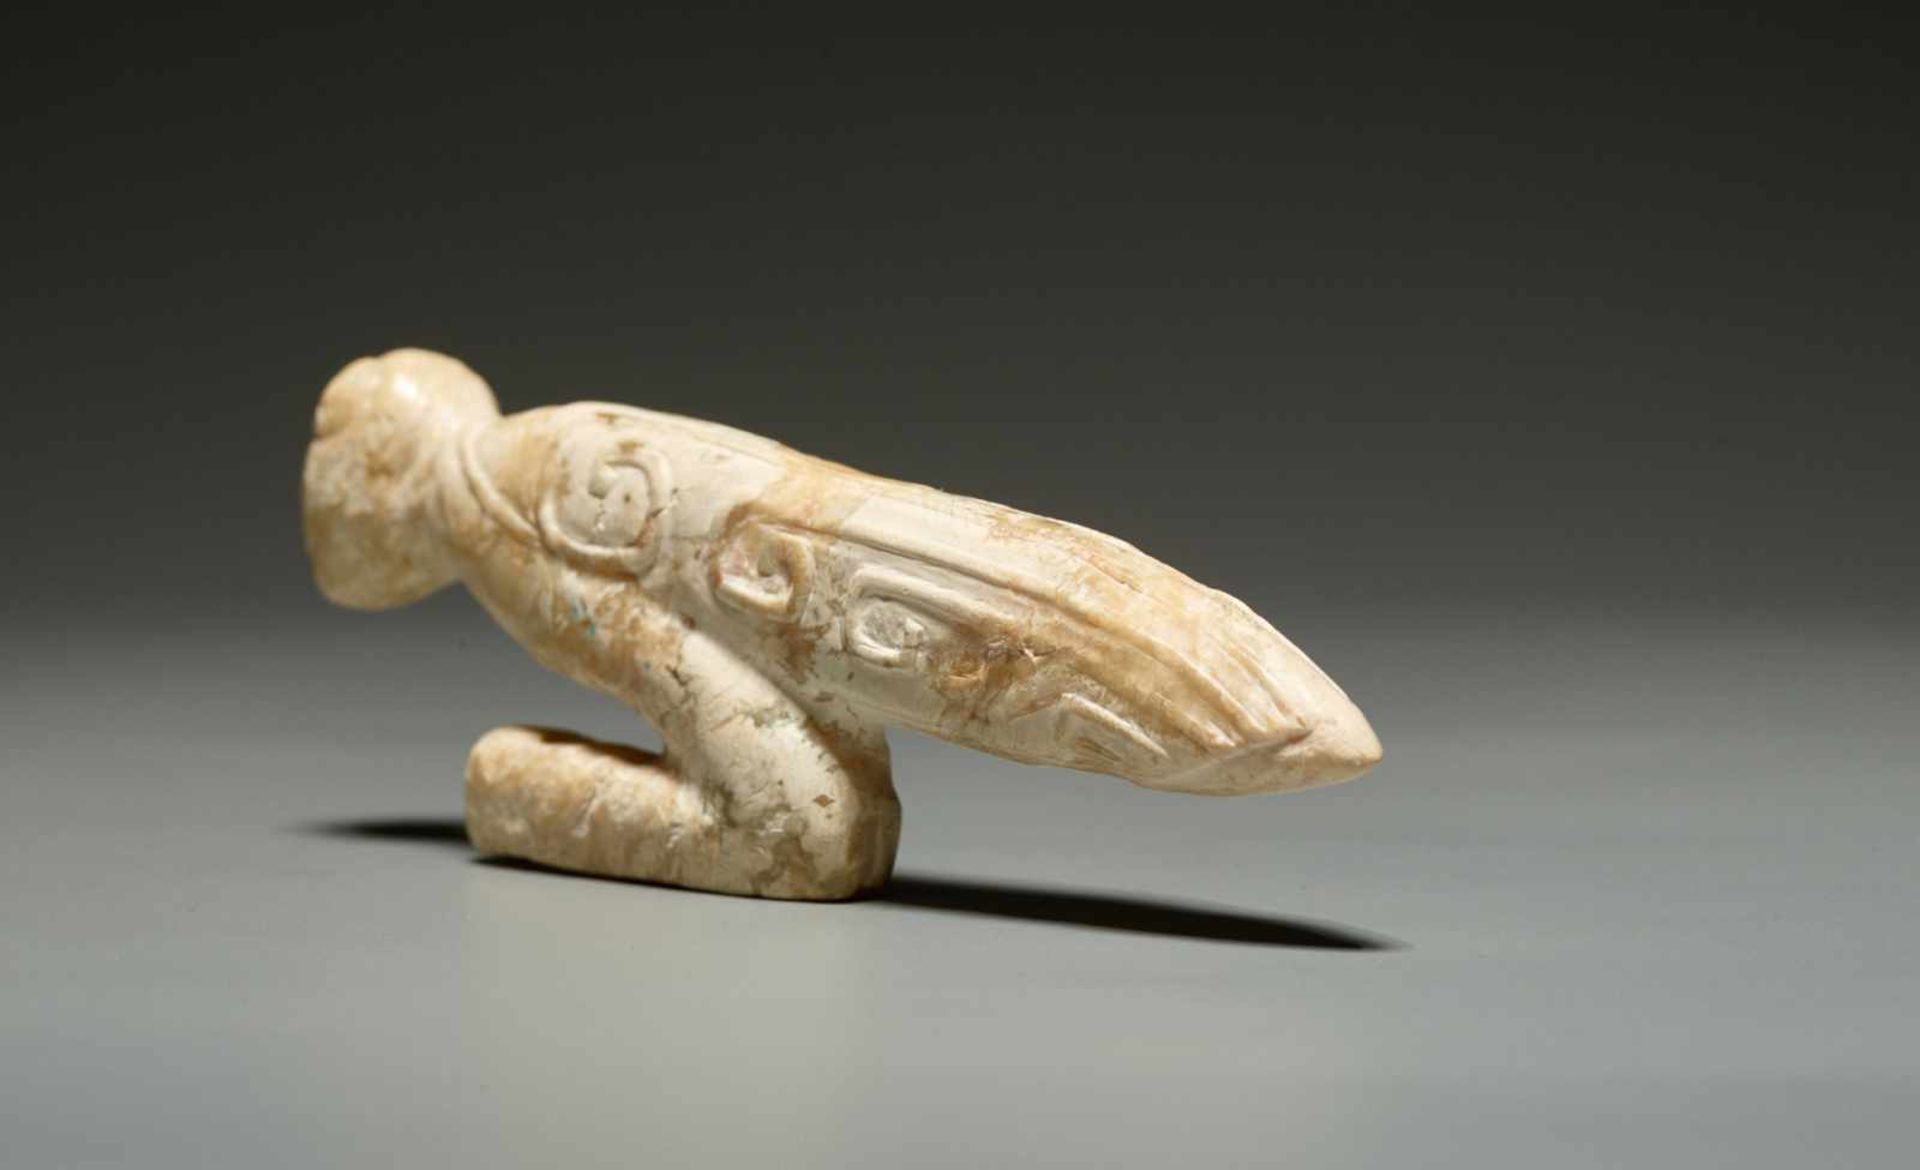 A LATE SHANG SCULPTURAL PRAYING MANTIS IN ALTERED JADE WITH AN IVORY QUALITY Jade. China, Late Shang - Image 6 of 11